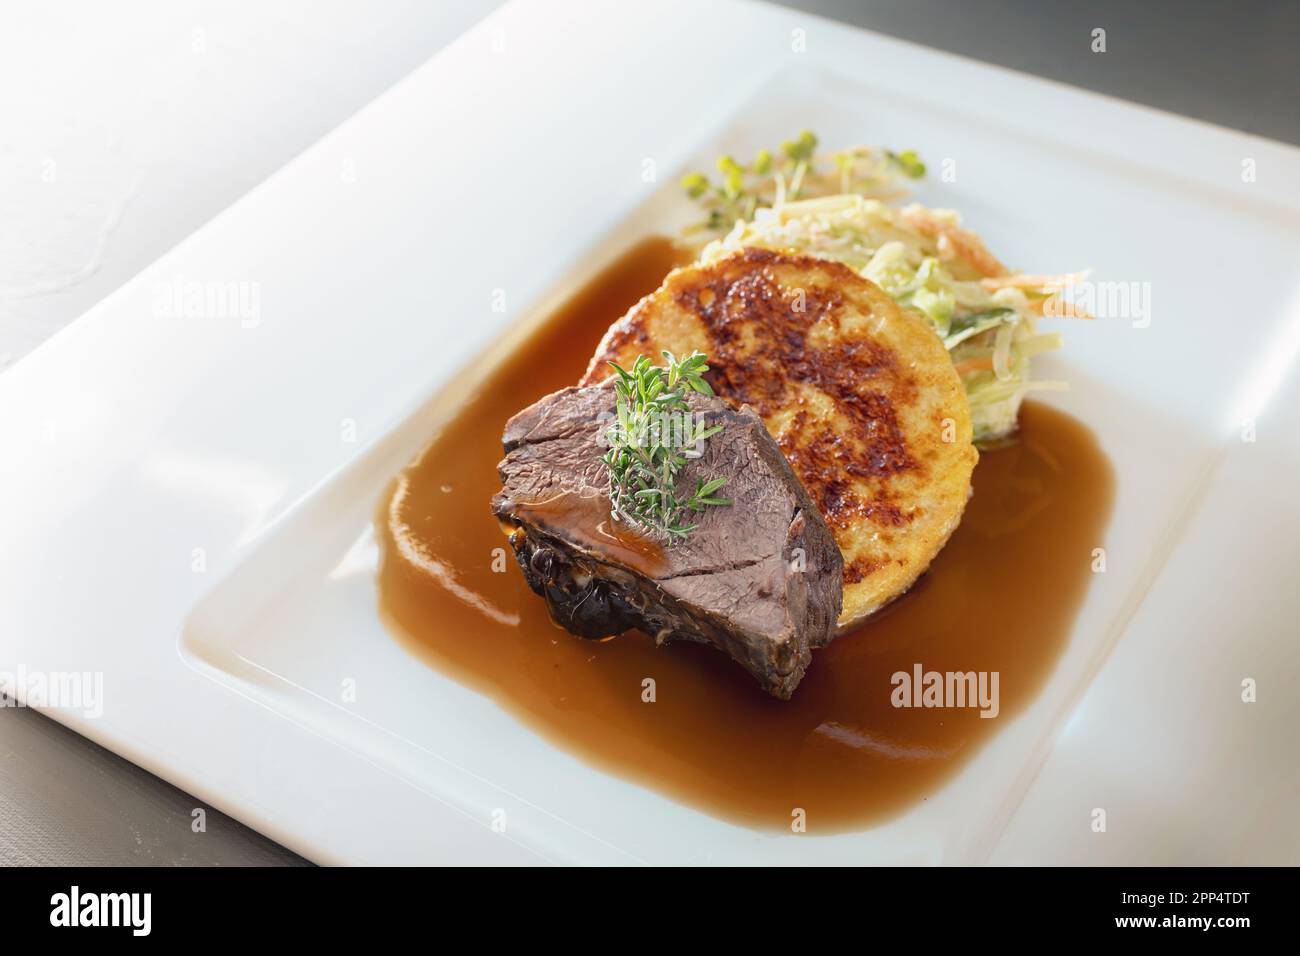 Roast deer, flat bread dumpling and round shaped cabbage vegetable with brown sauce and thyme garnish on a white plate, main course in a menu, copy sp Stock Photo